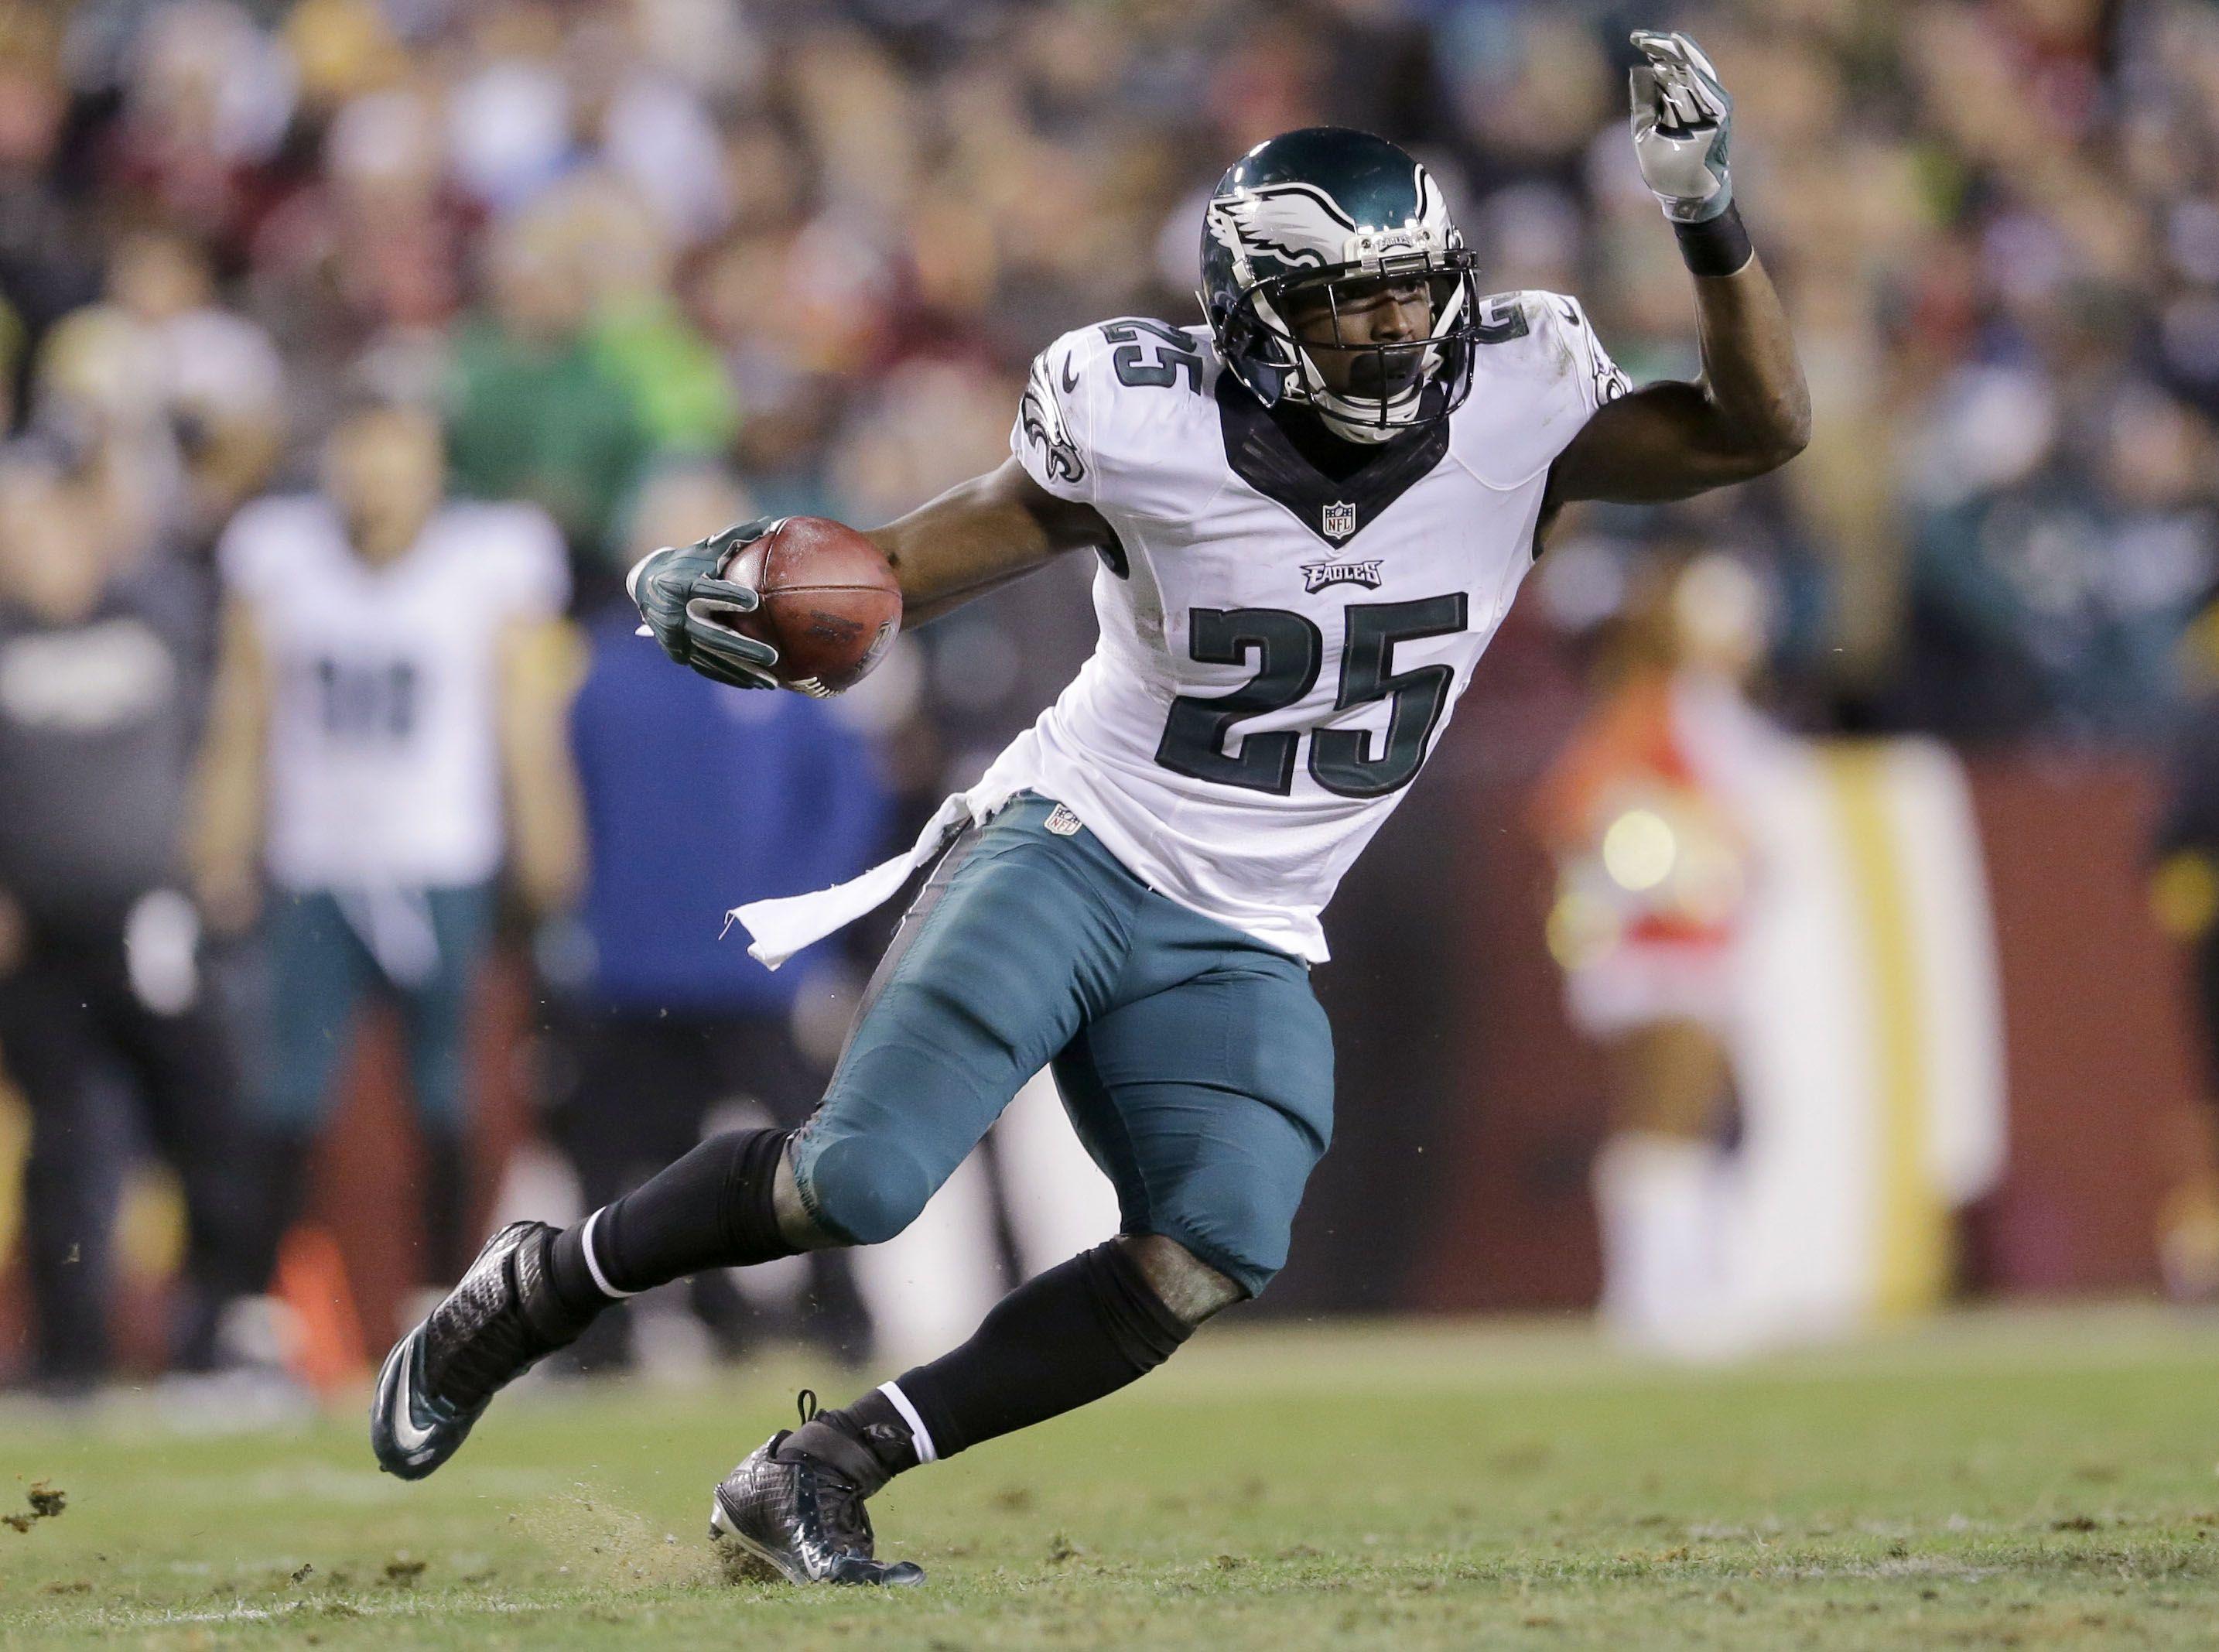 Eagles to trade running back McCoy to Buffalo for Alonso. The Japan